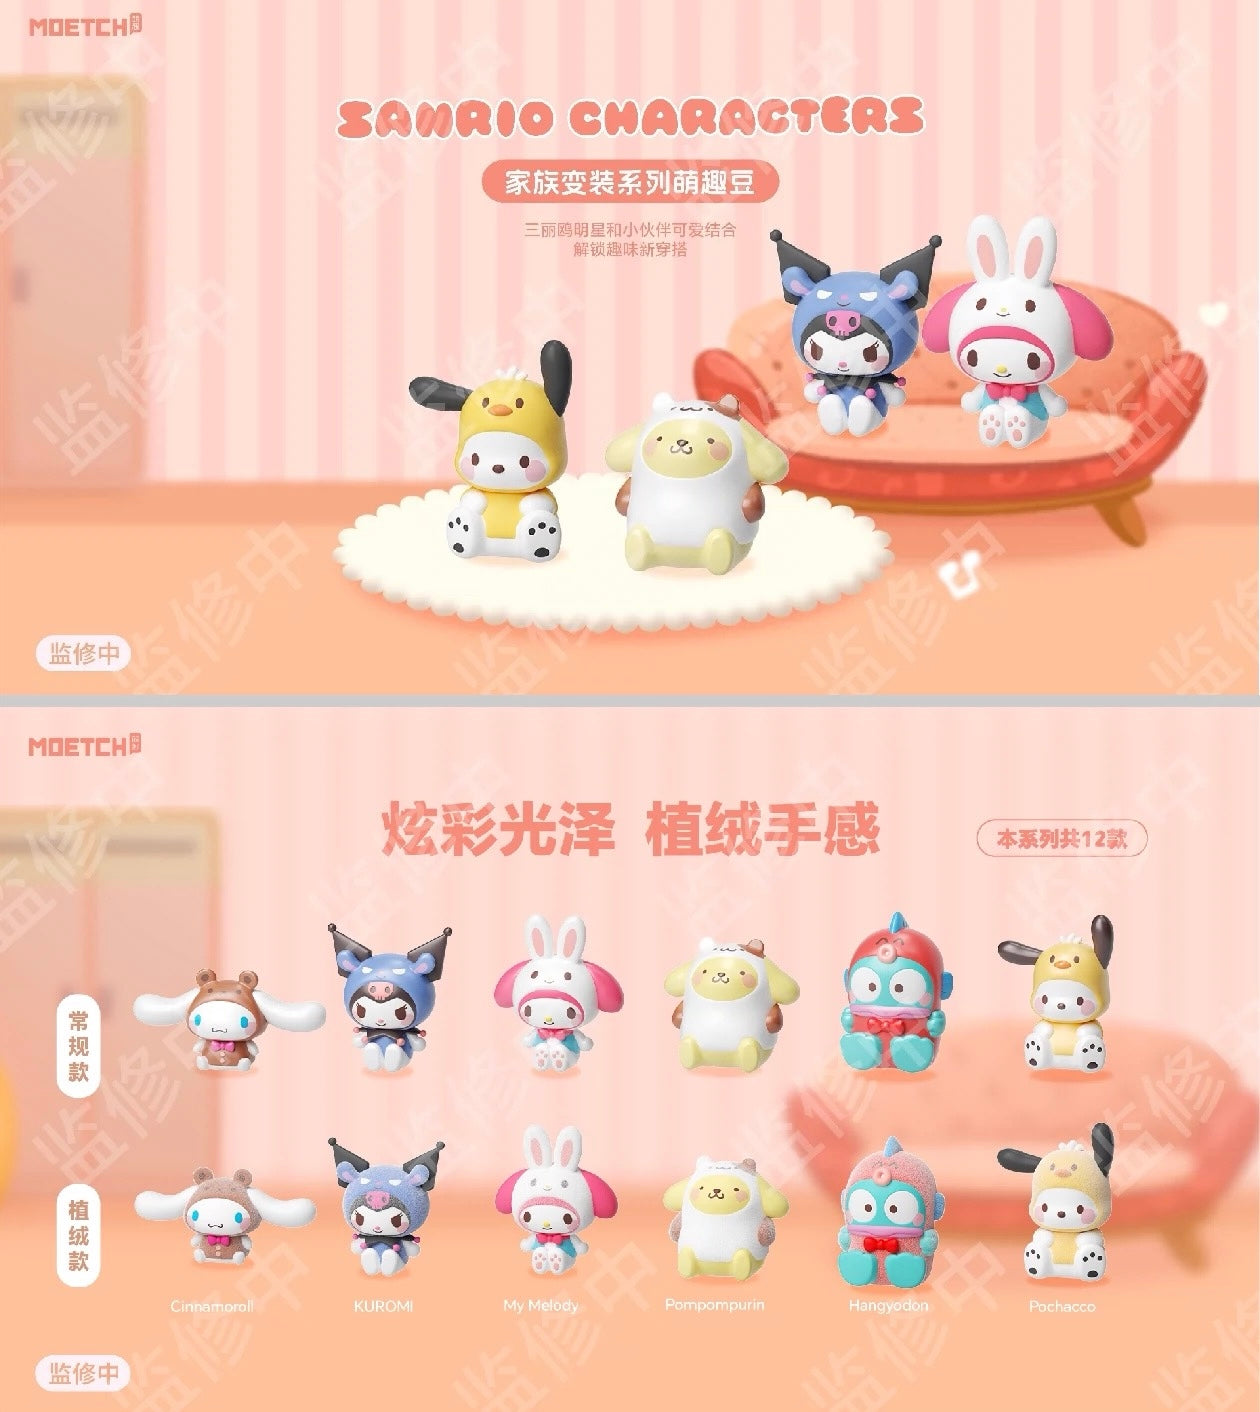 【NEW ARRIVAL】Sanrio Characters Family Cosplay Mini Bean 2 beans